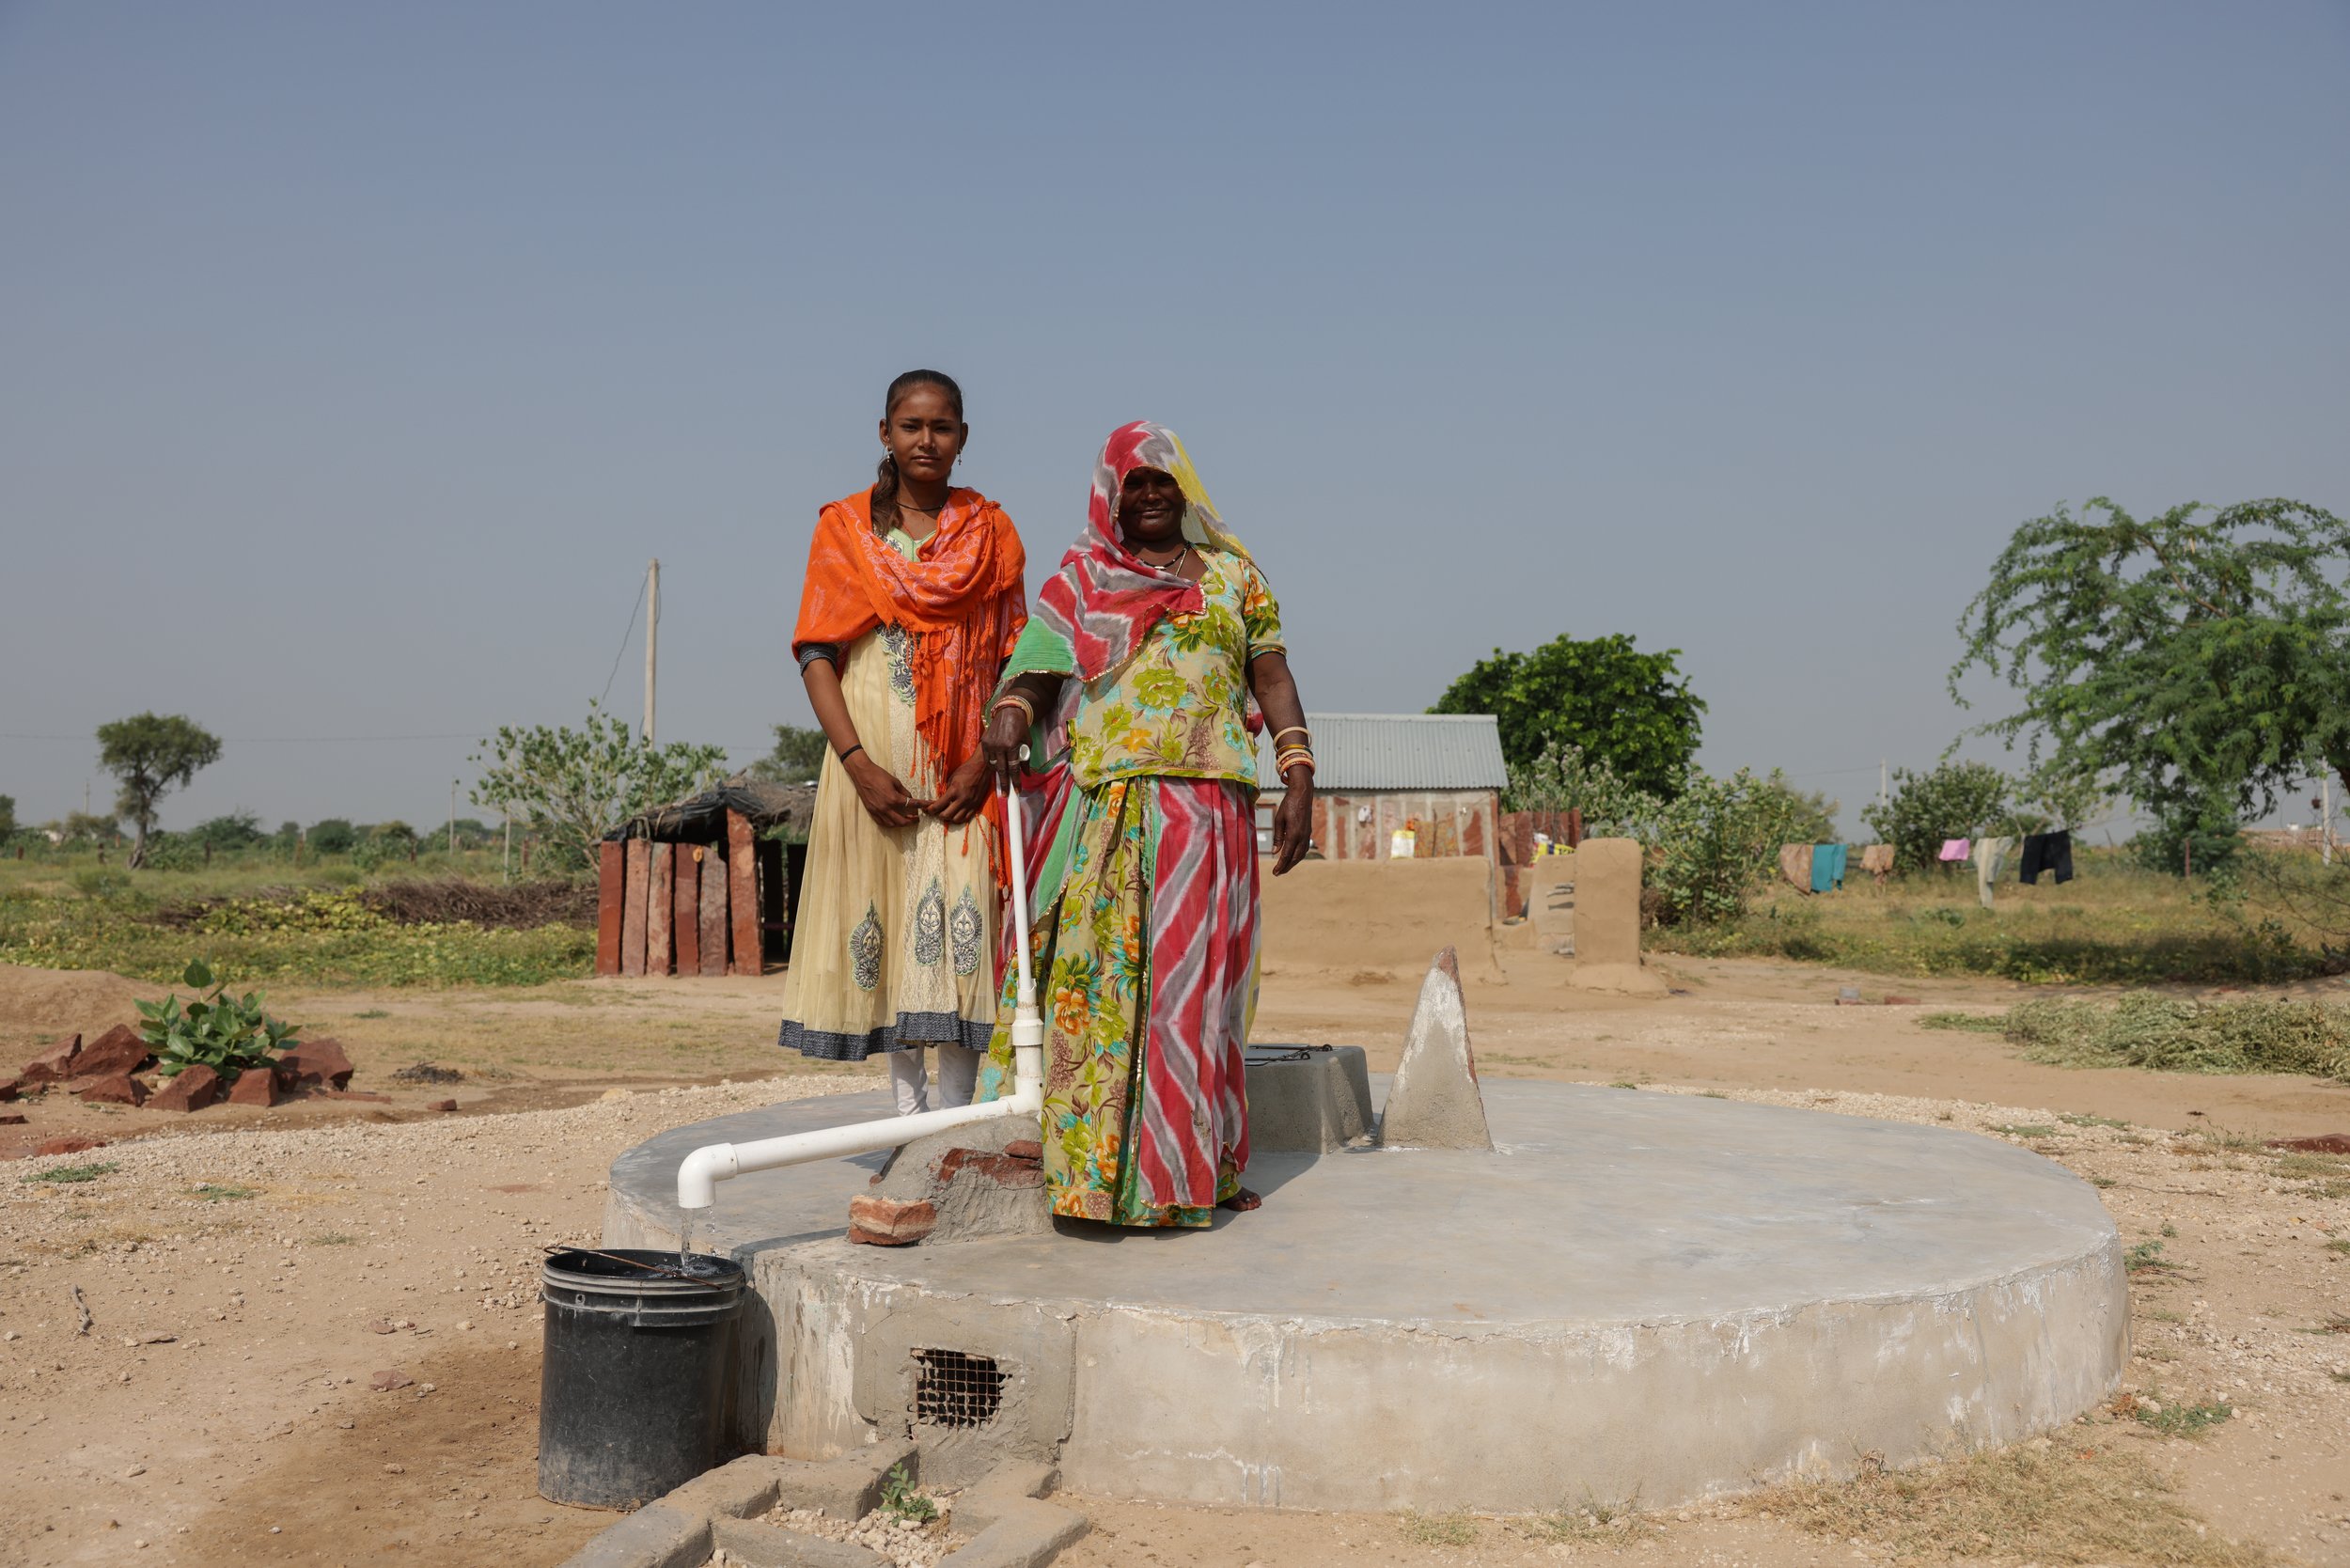 Chirmi and her daughter outside their home pumping water from a rainwater harvesting tank.